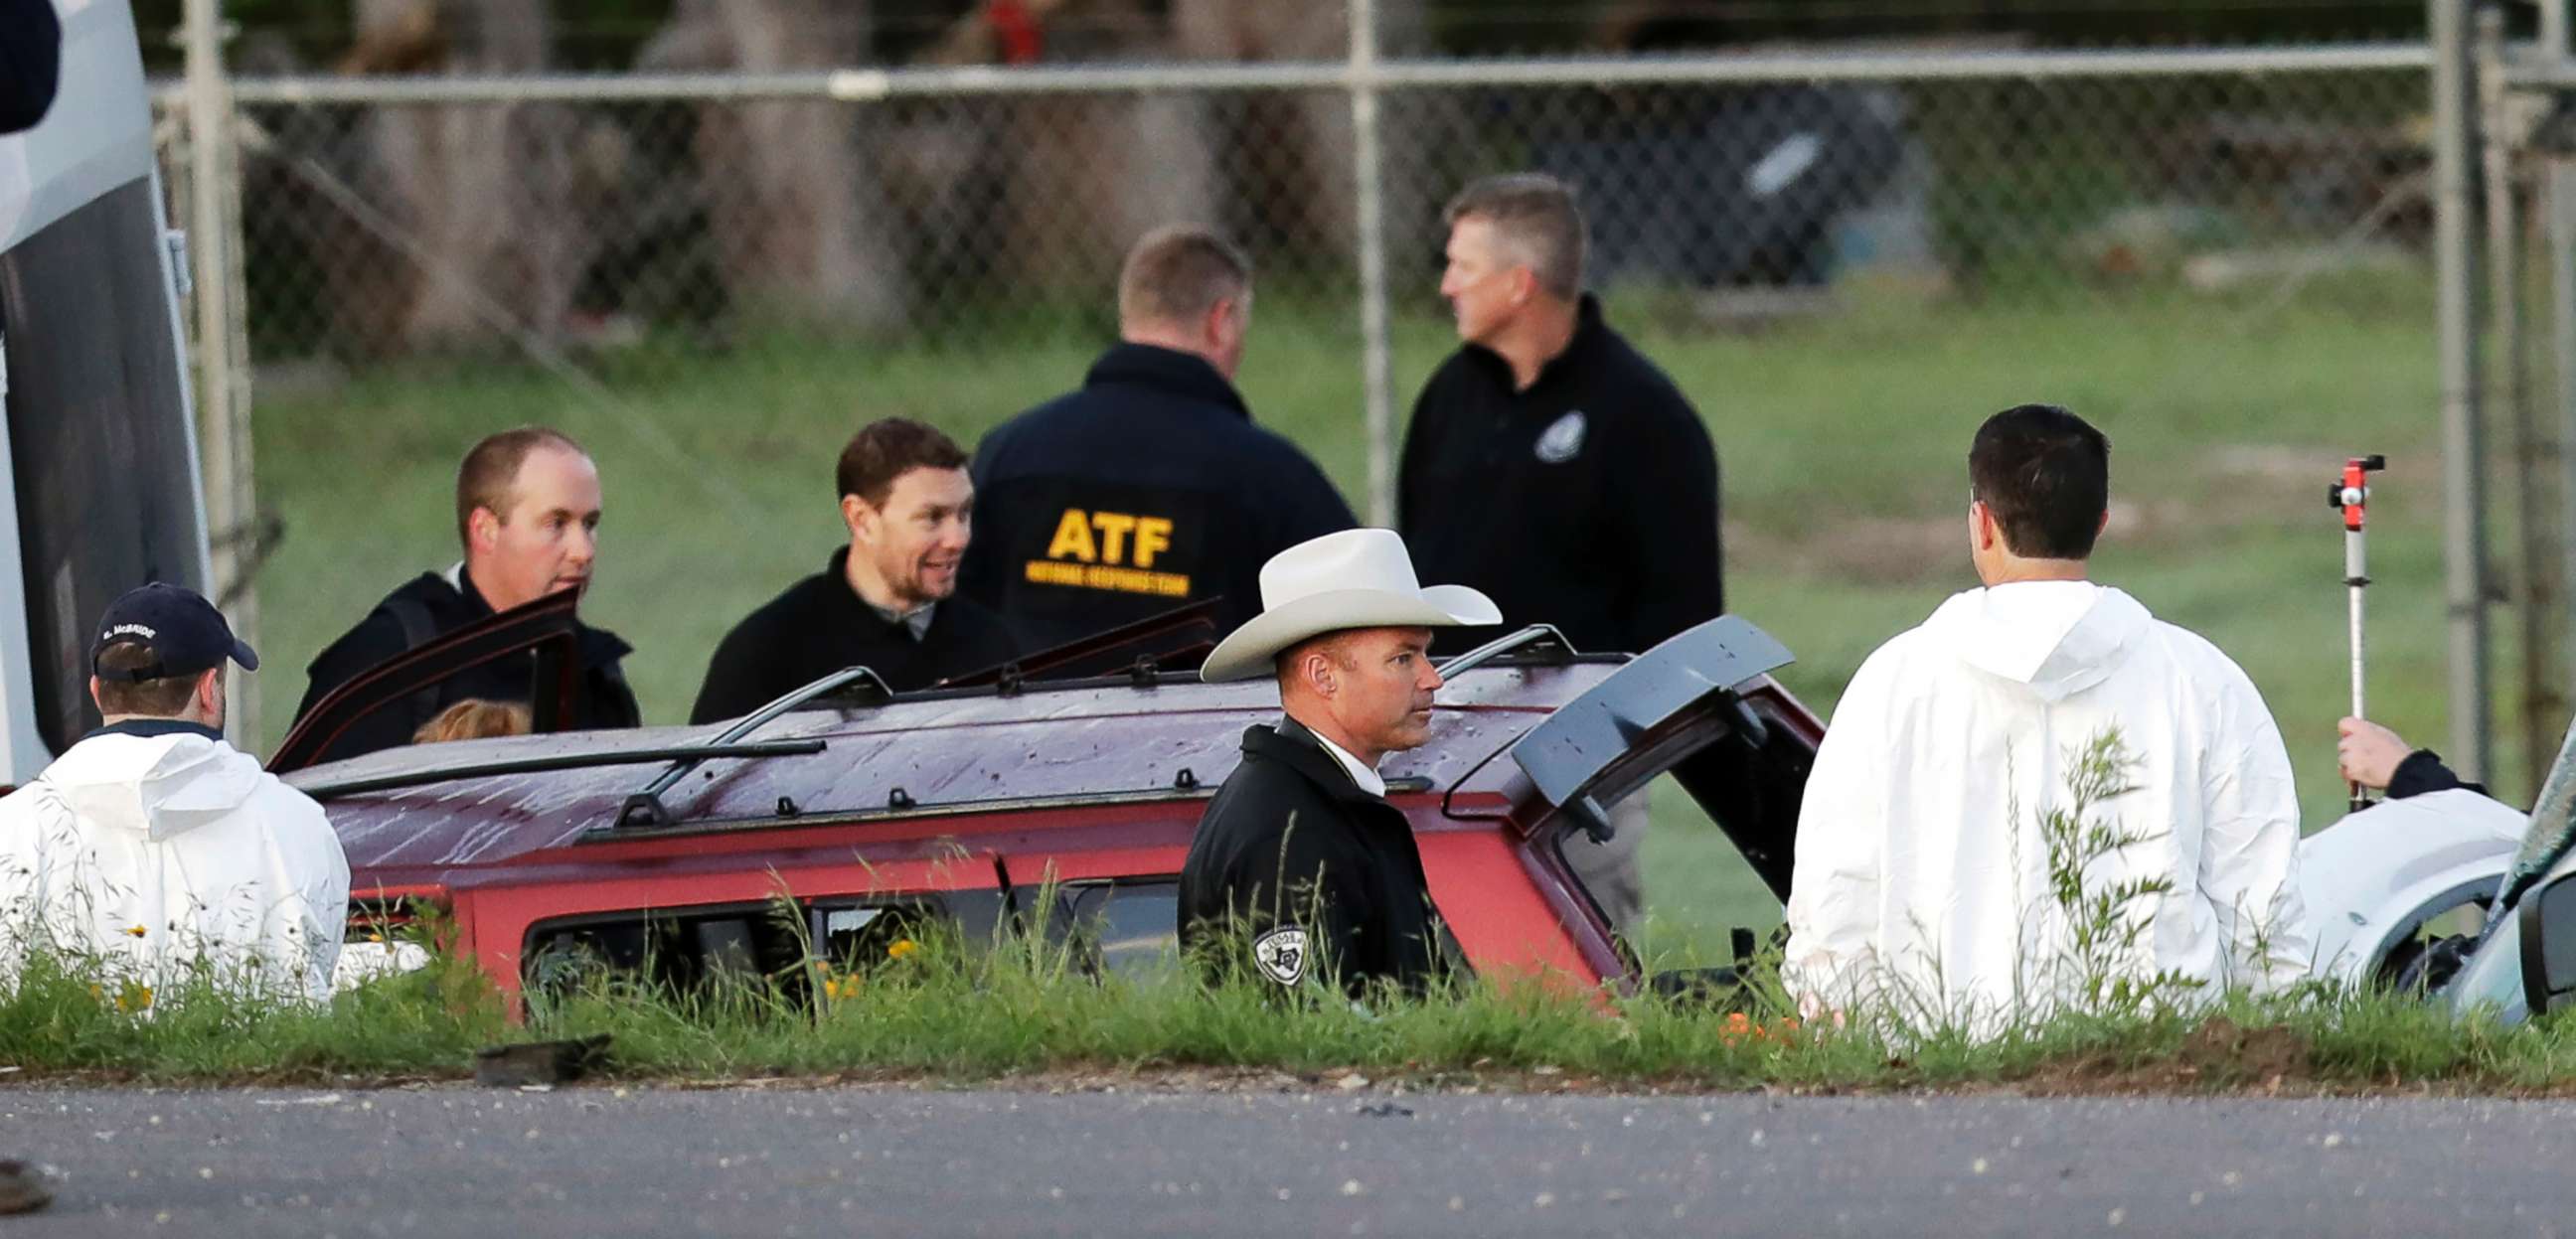 PHOTO: Officials investigate the scene where a suspect in a series of bombing attacks in Austin blew himself up as authorities closed in, March 21, 2018, in Round Rock, Texas.